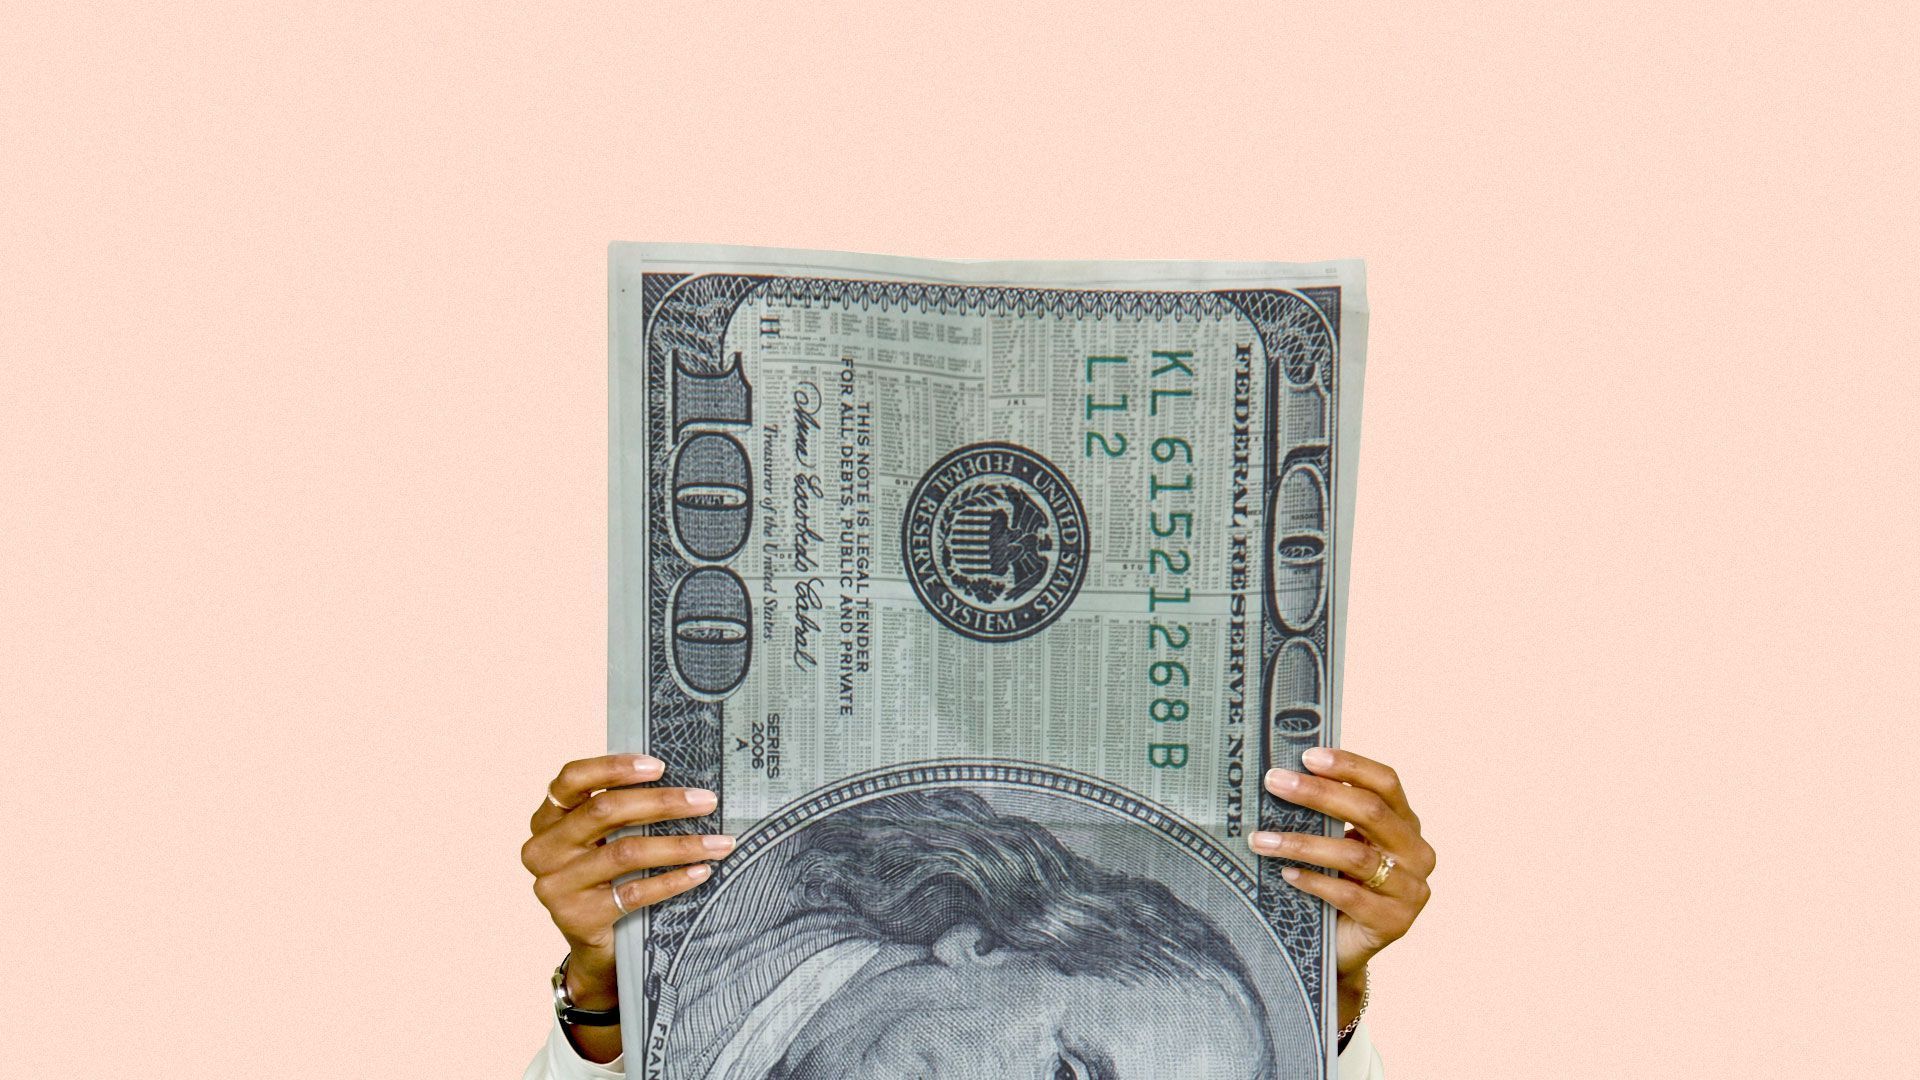 Illustration of a person holding money that is styled like a newspaper